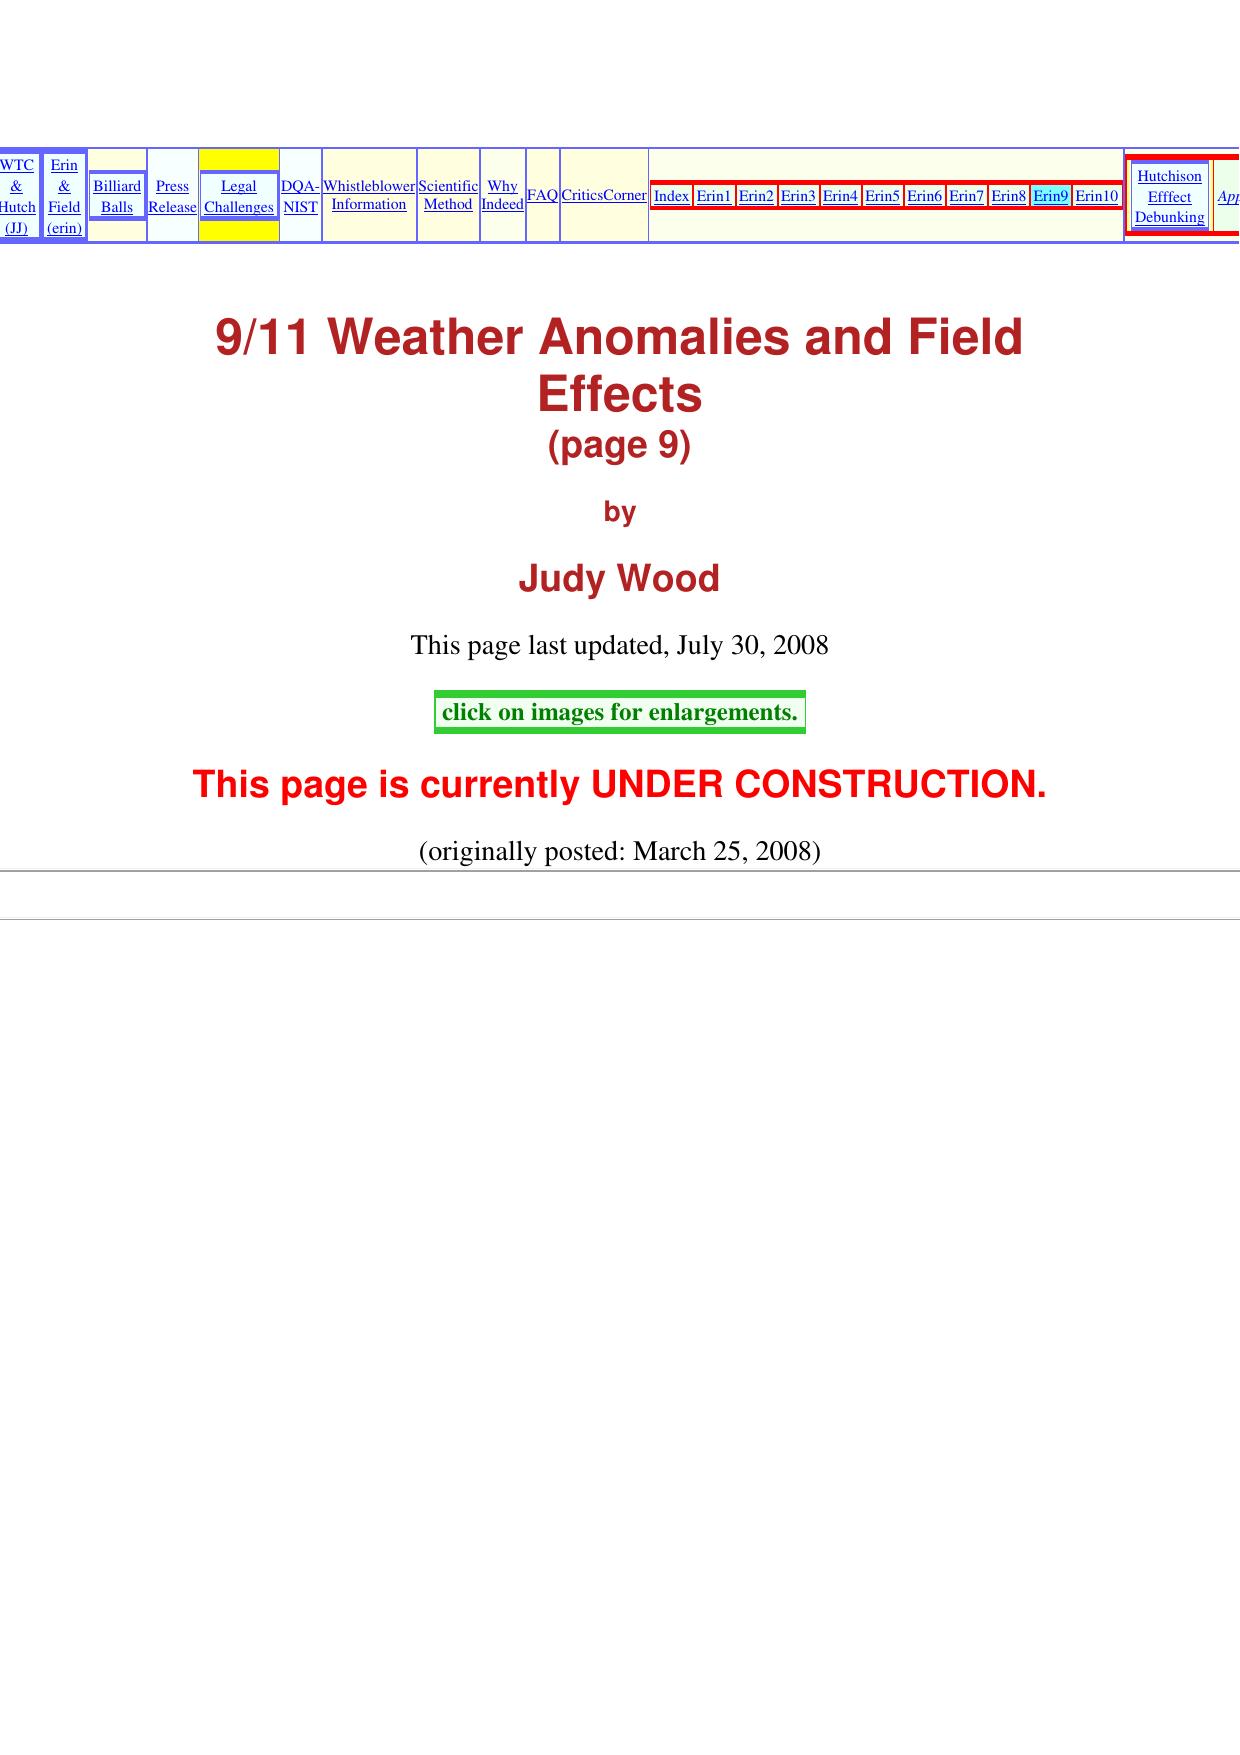 9-11 Weather Anomalies and Field Effects 3 by Unknown